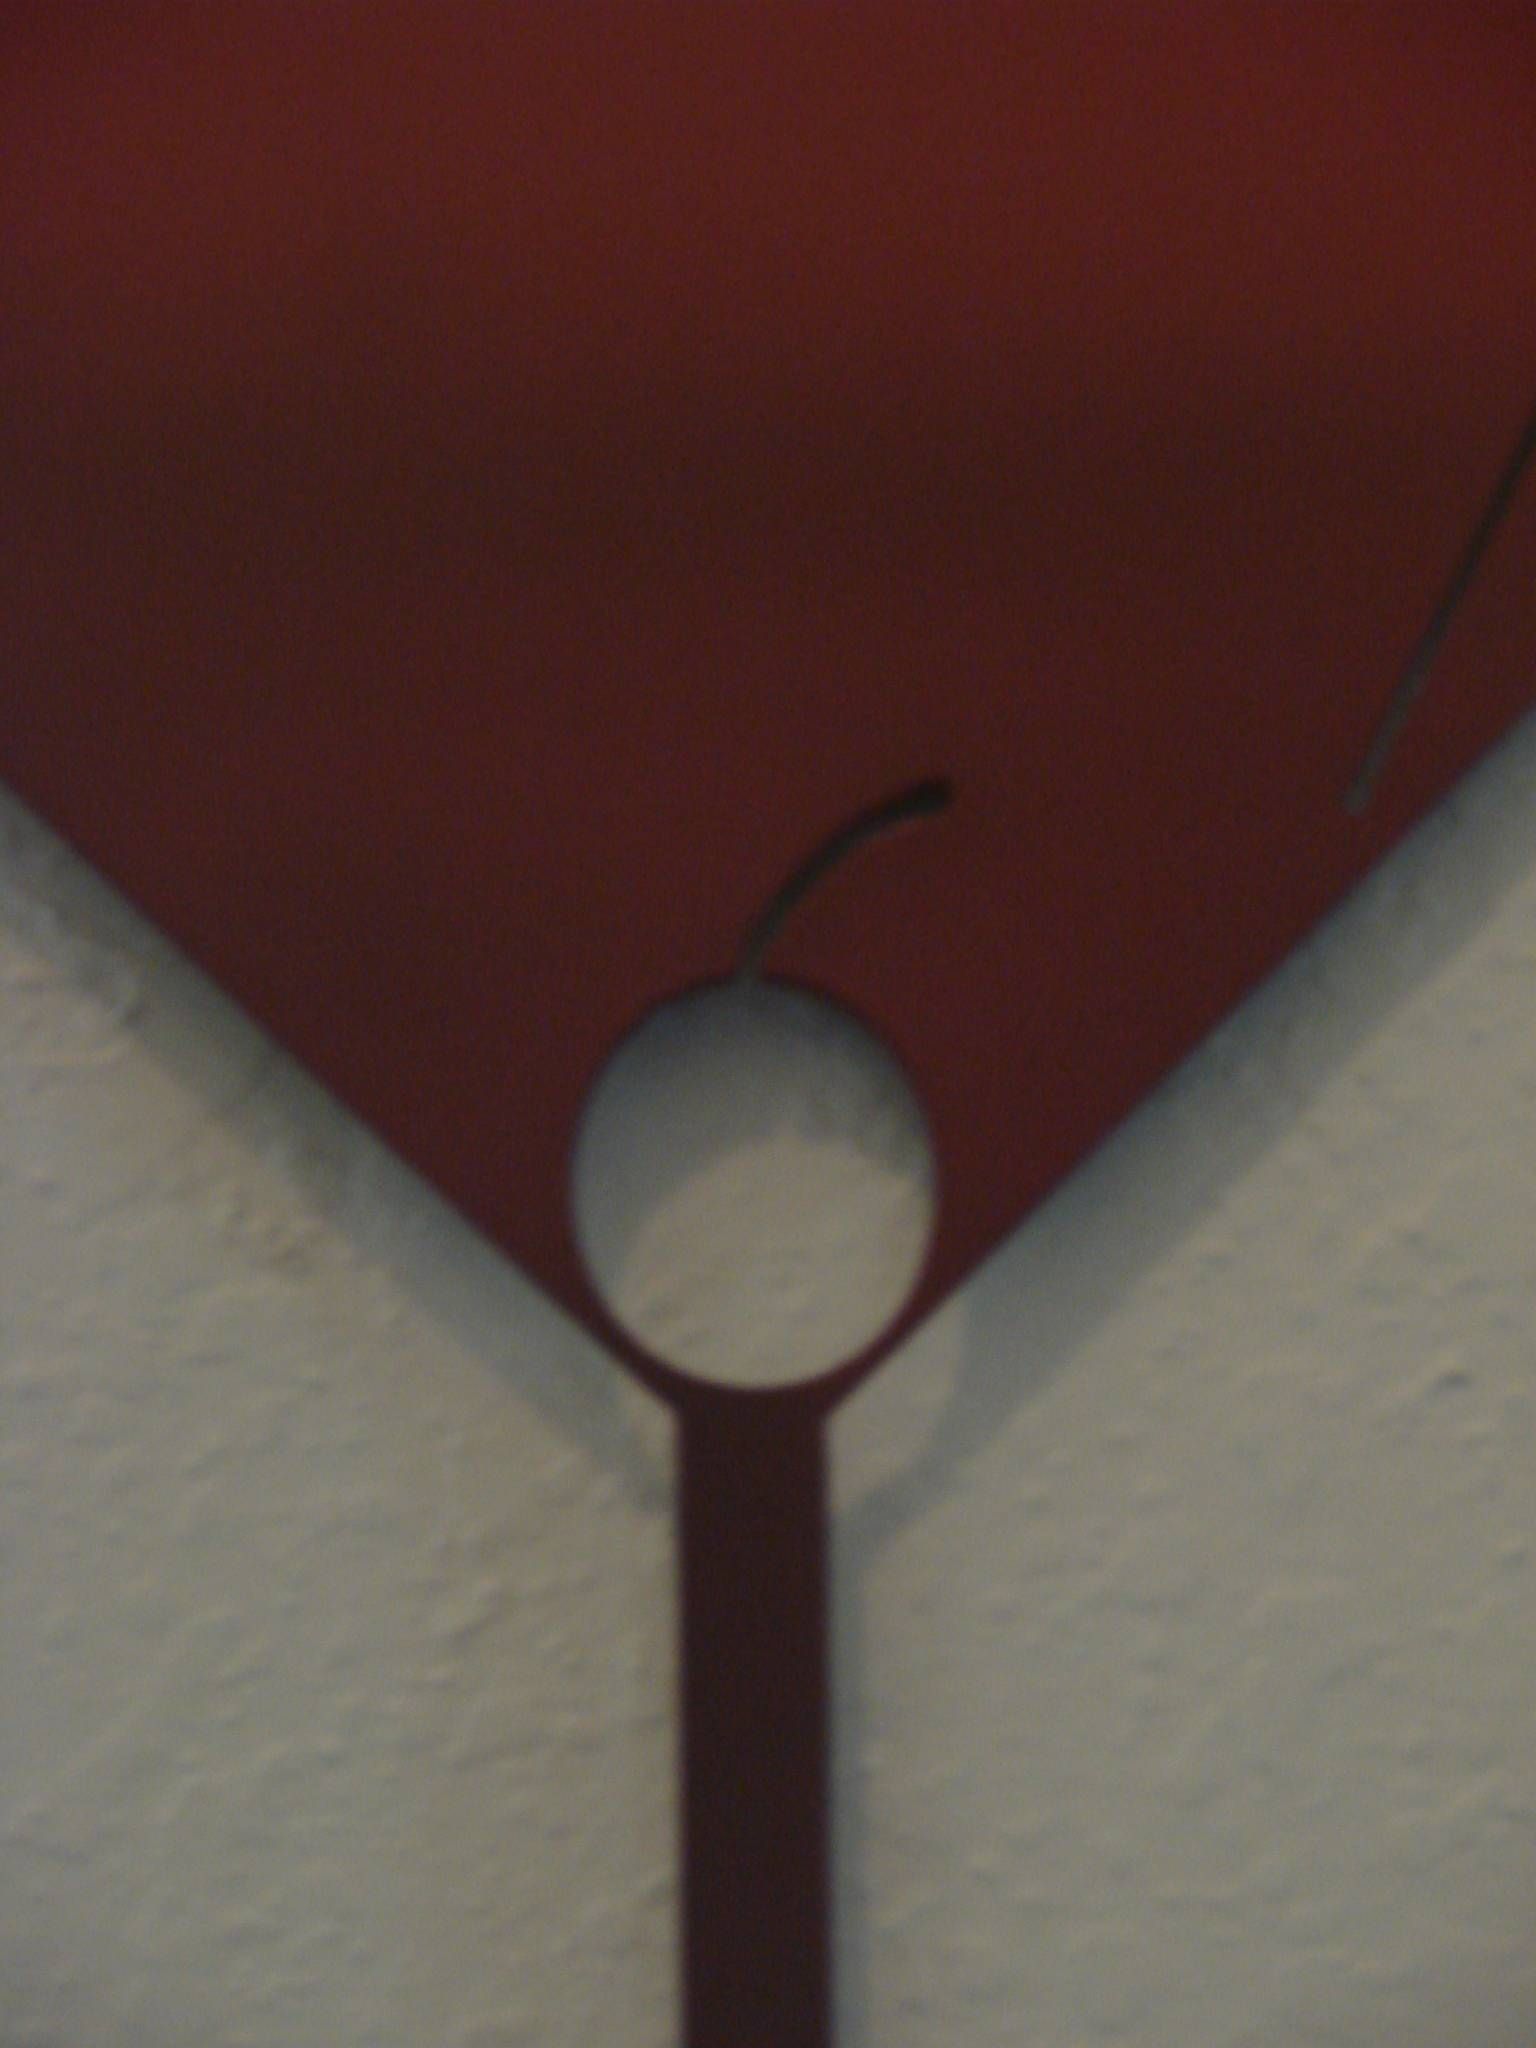 16 Gauge Ombre Red To Black Cosmopolitan Martini Glass Metal Wall Within Most Current Martini Metal Wall Art (Gallery 19 of 30)